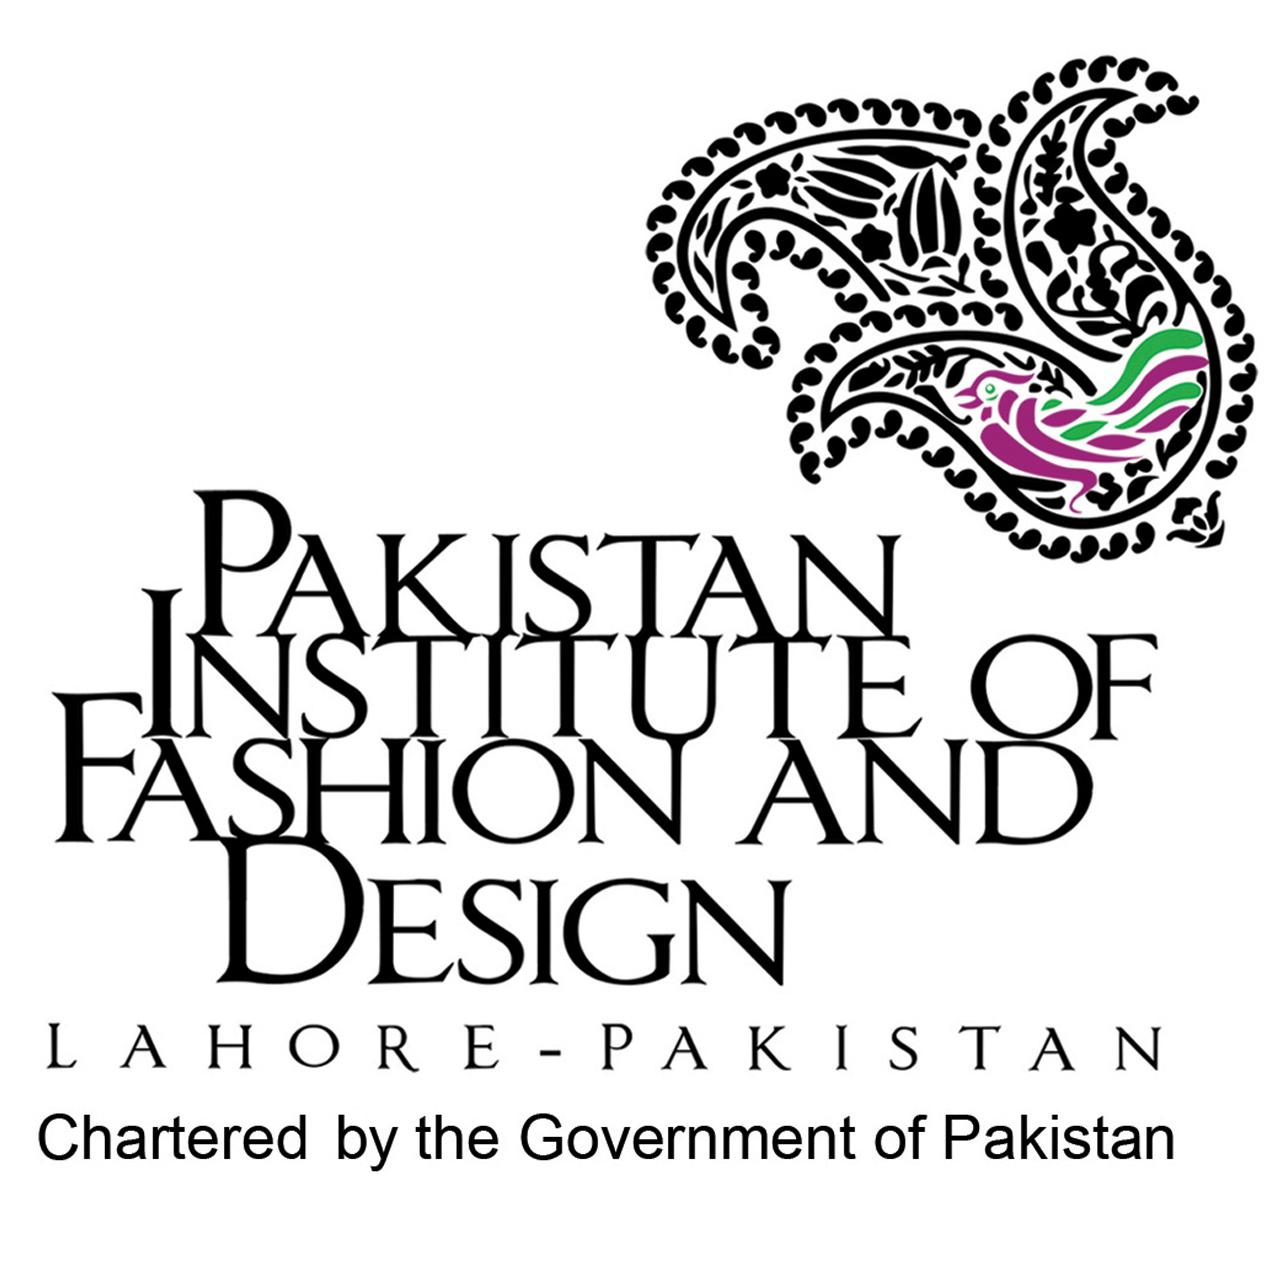 Pakistan Institute of Fashion and Design, Lahore